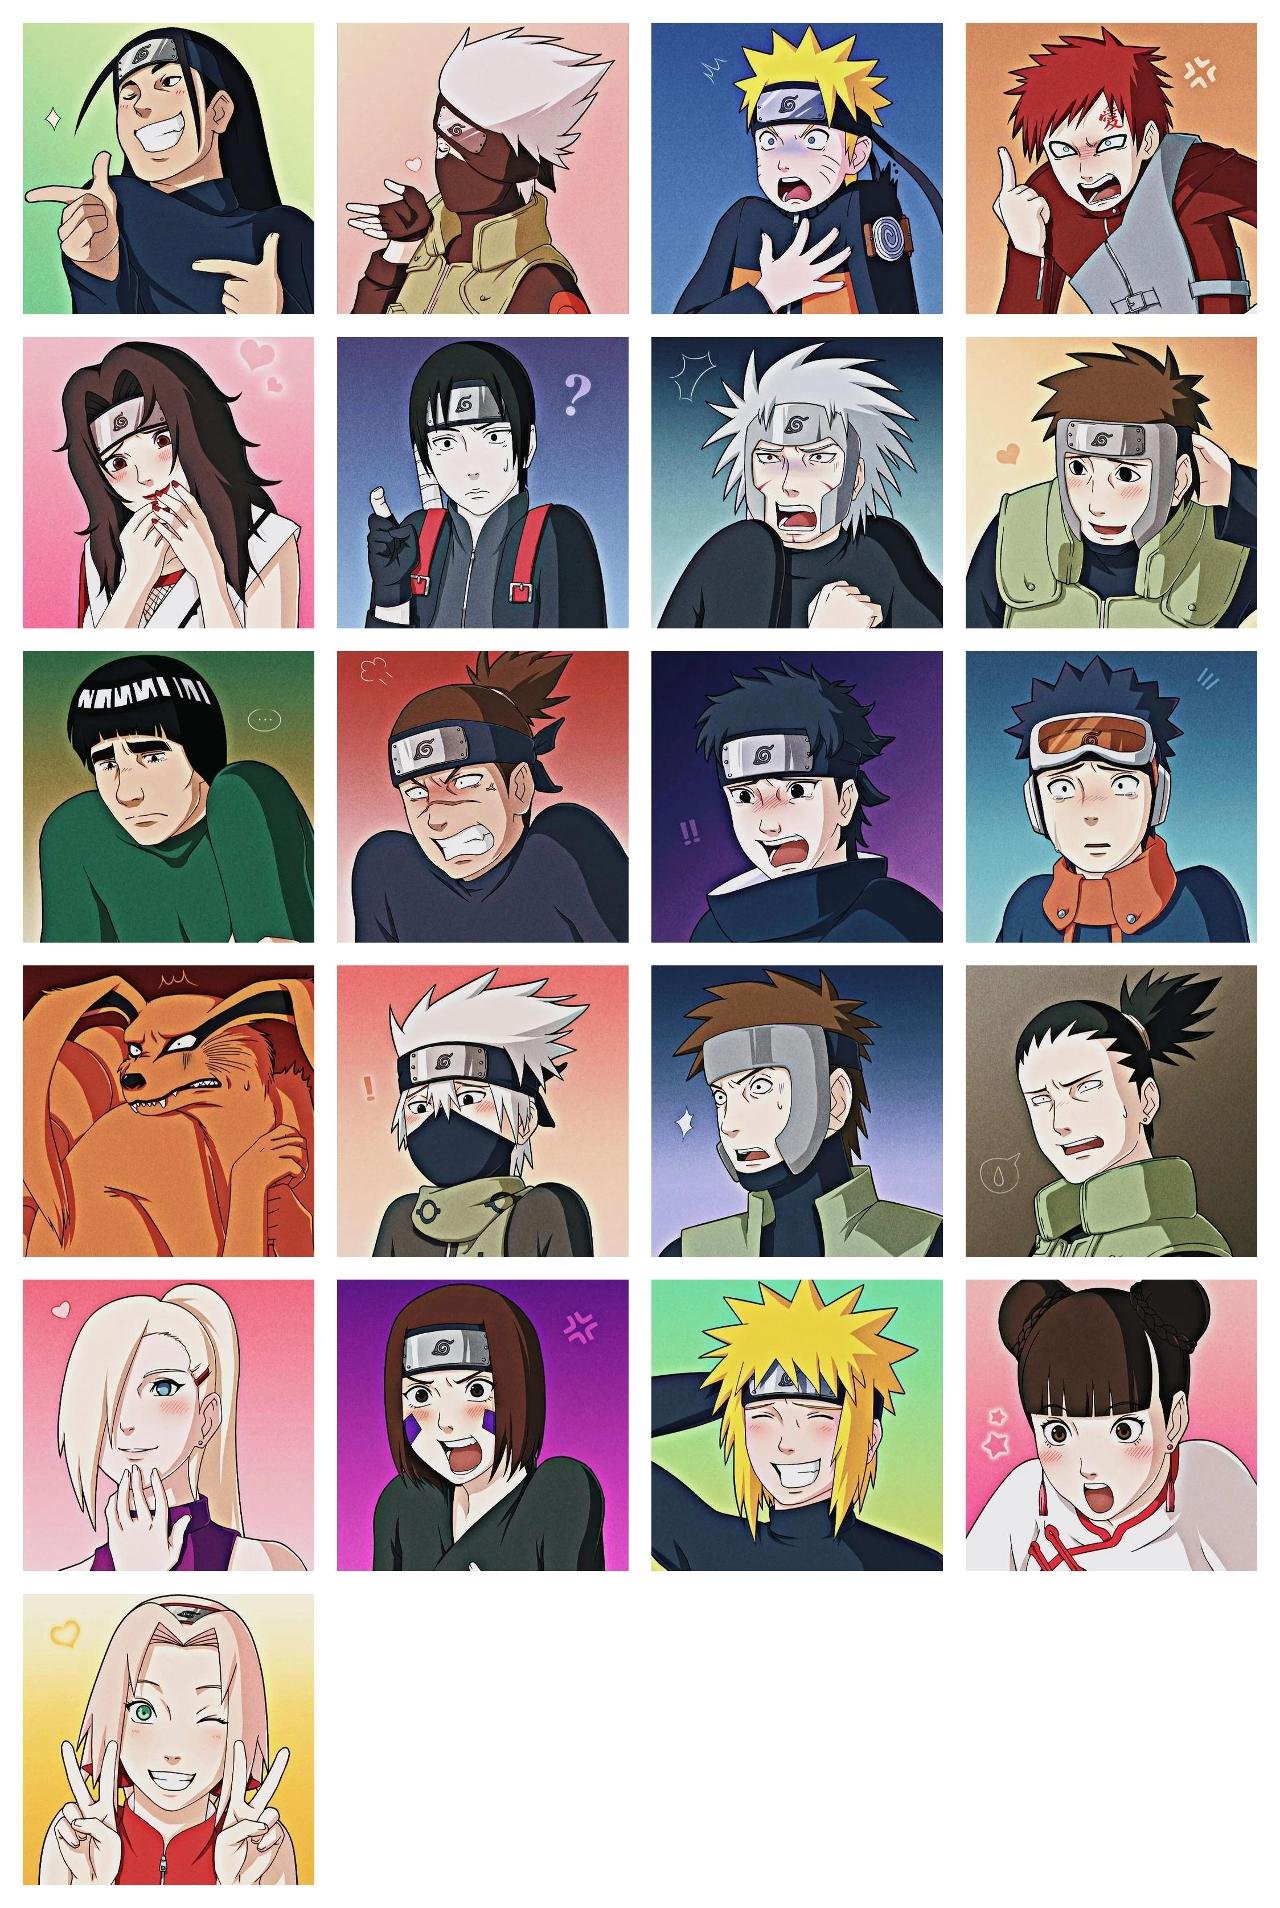 Naruto #35 Naruto sticker pack for Whatsapp, Telegram, Signal, and others chatting and message apps